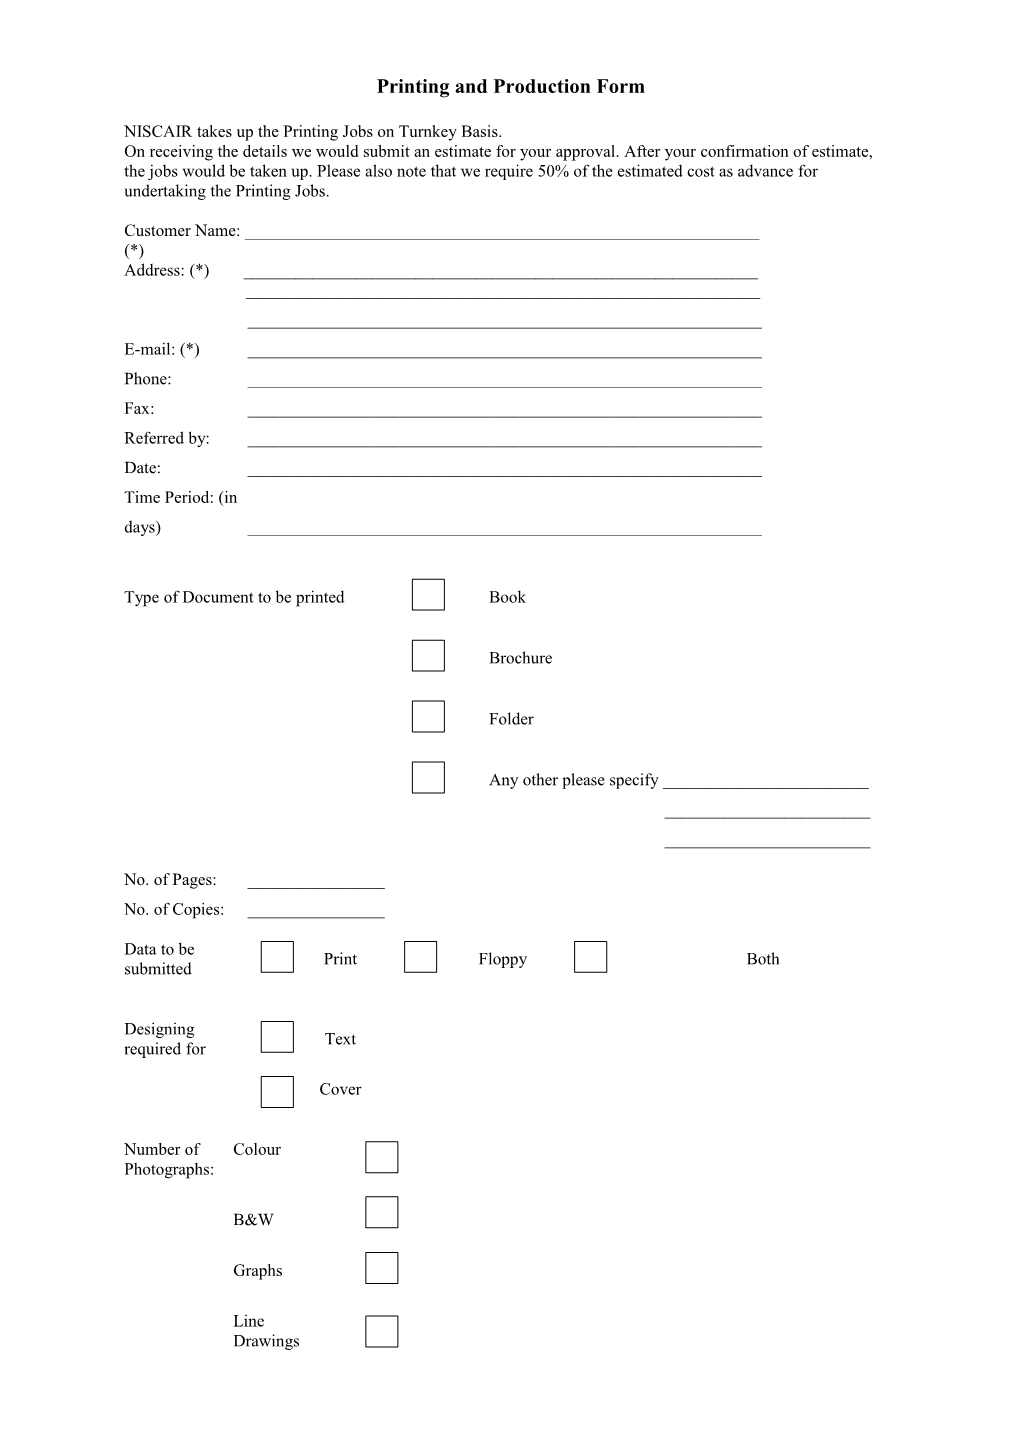 Printing and Production Form